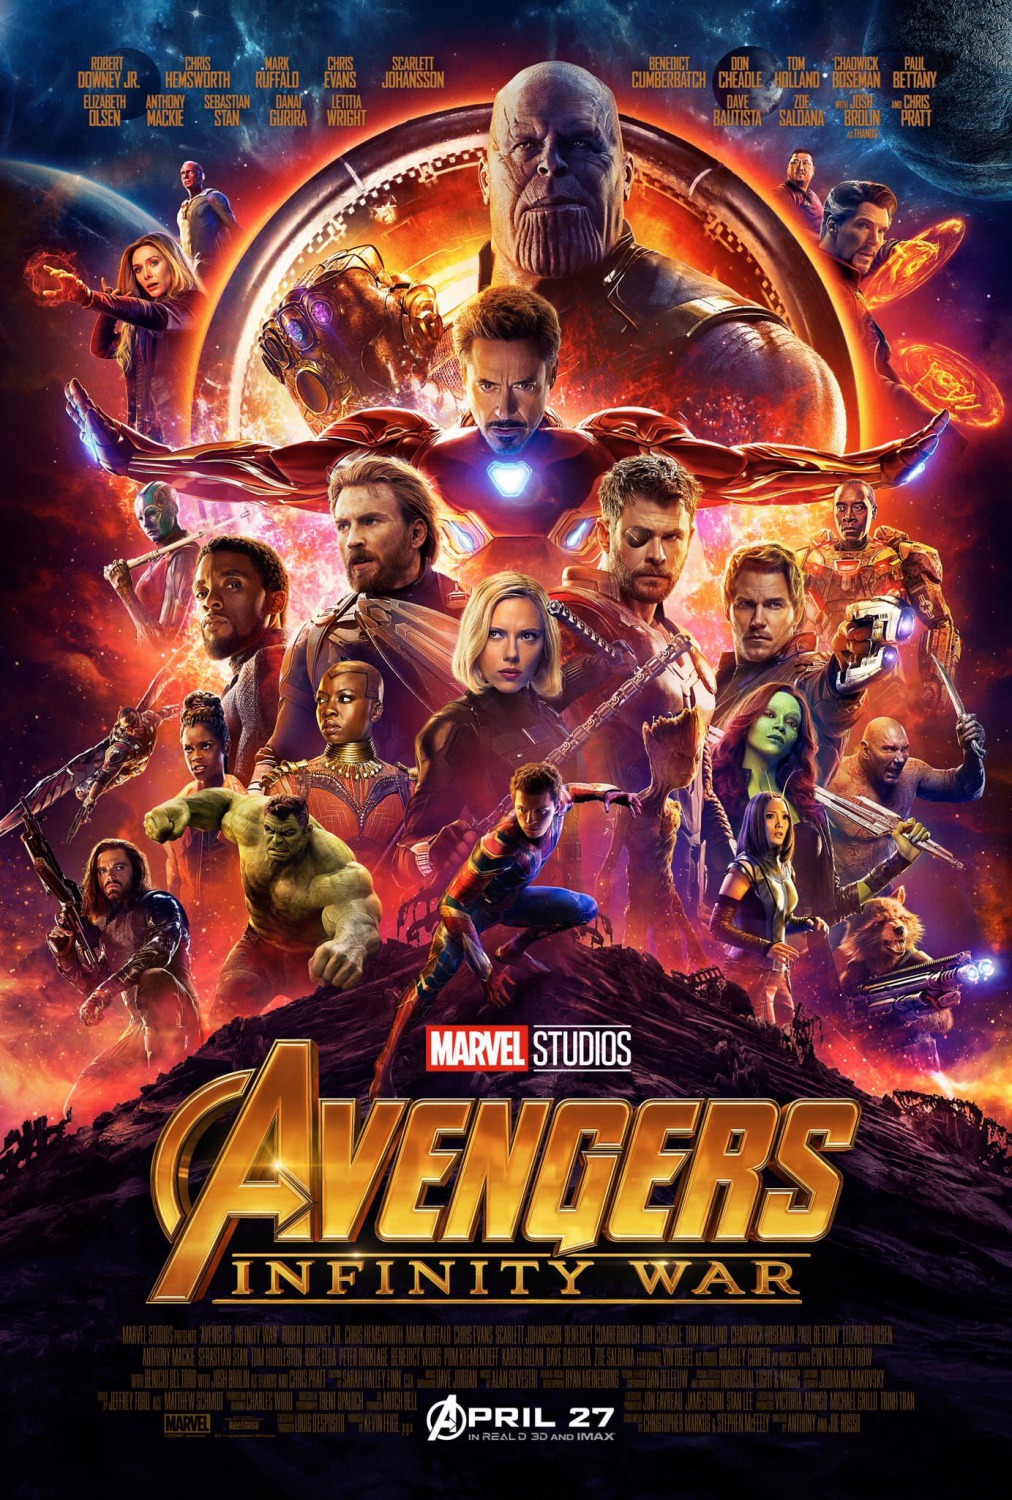 Avengers: Infinity War poster featuring Thanos and almost every Marvel character from the past 10 years. 